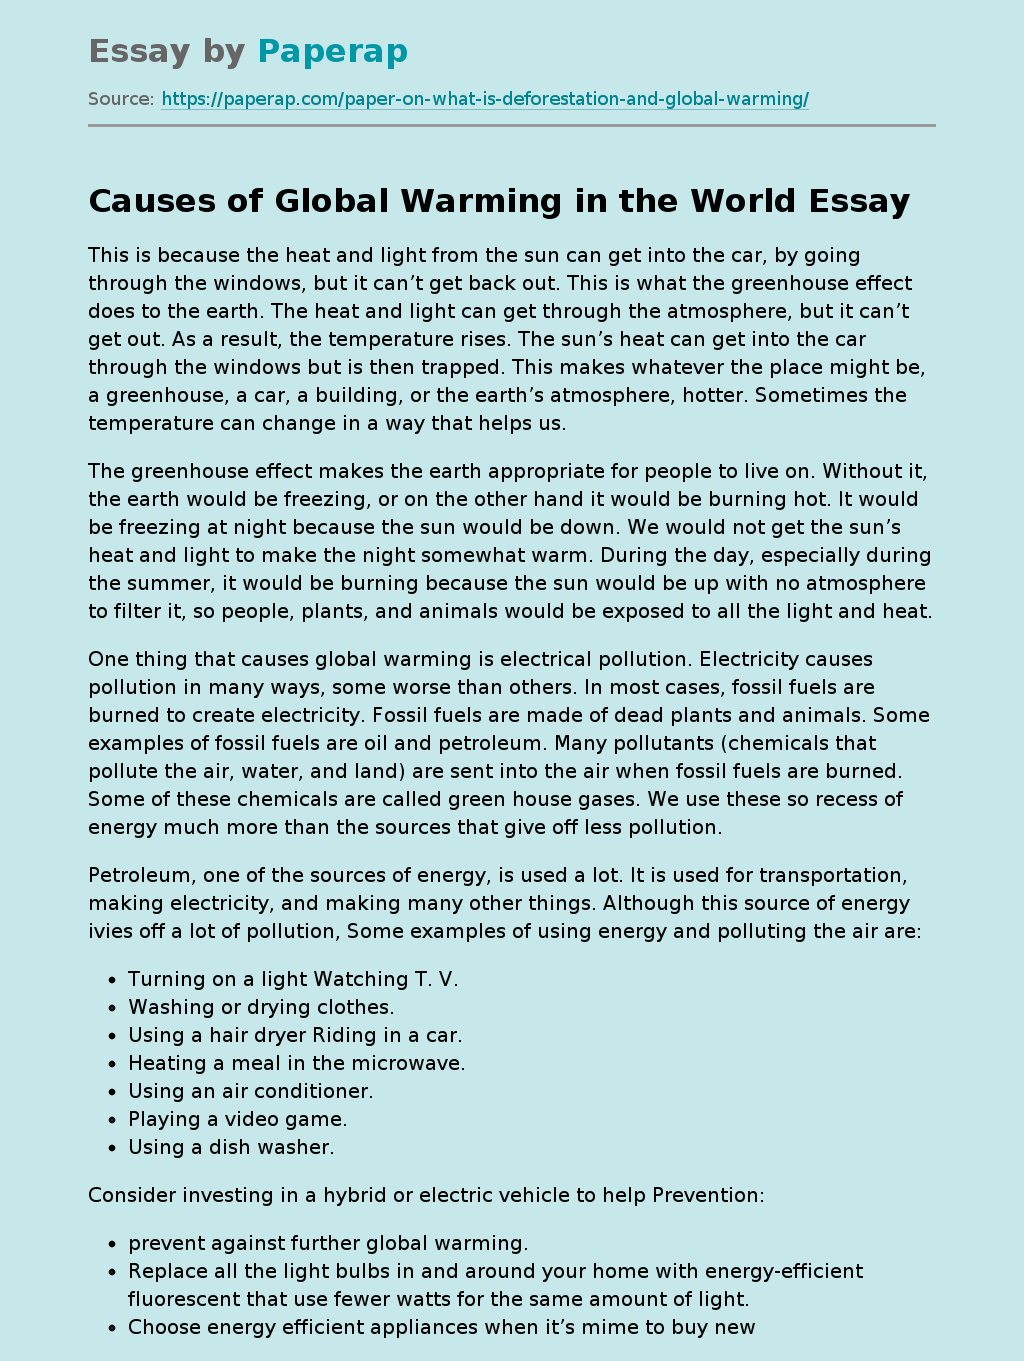 Causes of Global Warming in the World